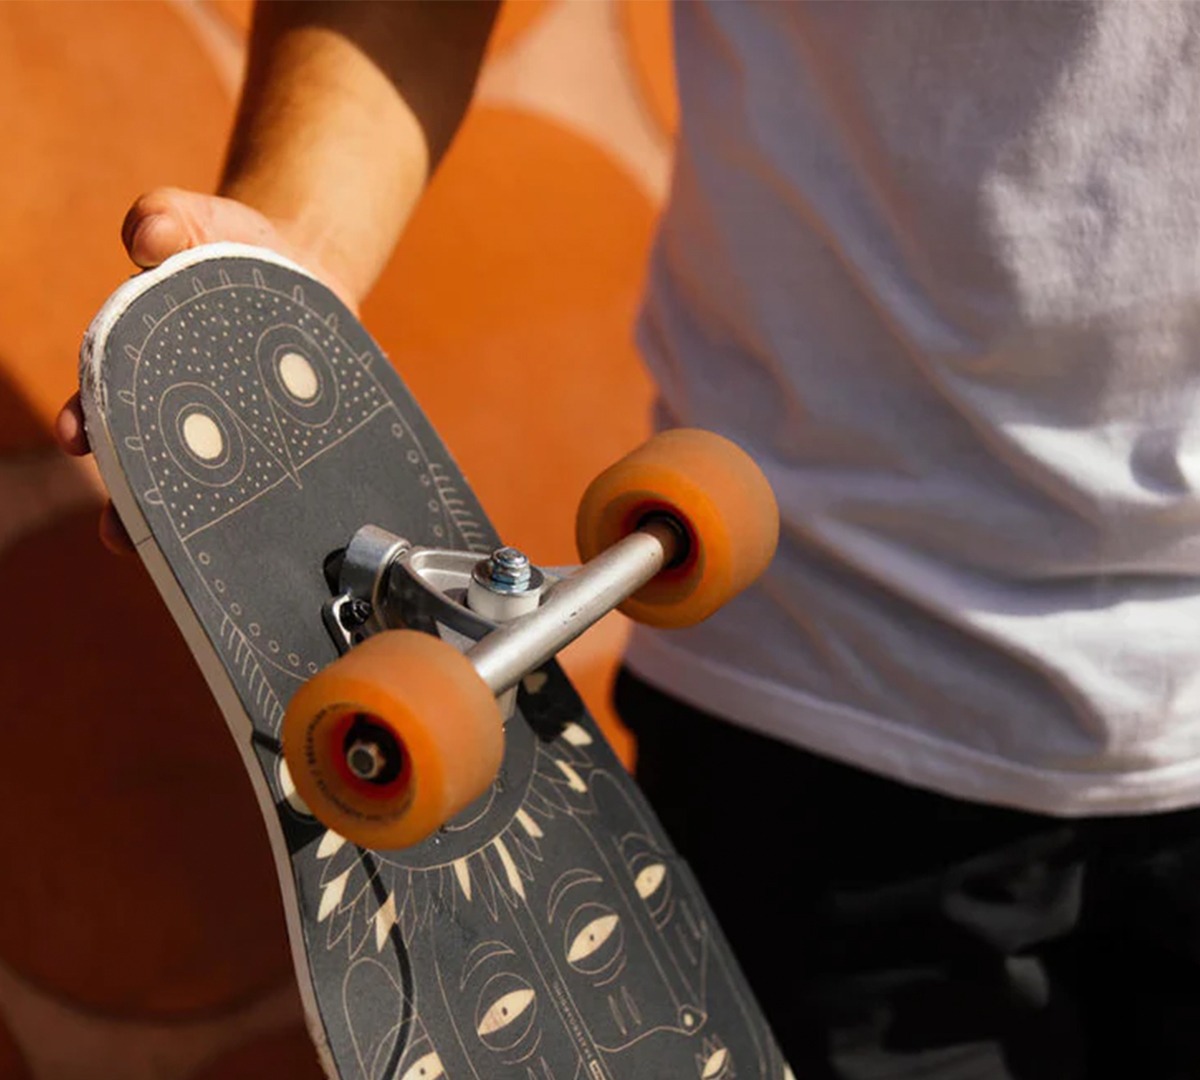 Skateboards-Top-Rated-Skates-and-Scooters-for-all-Ages-and-Skill-Levels-at-Decathlon